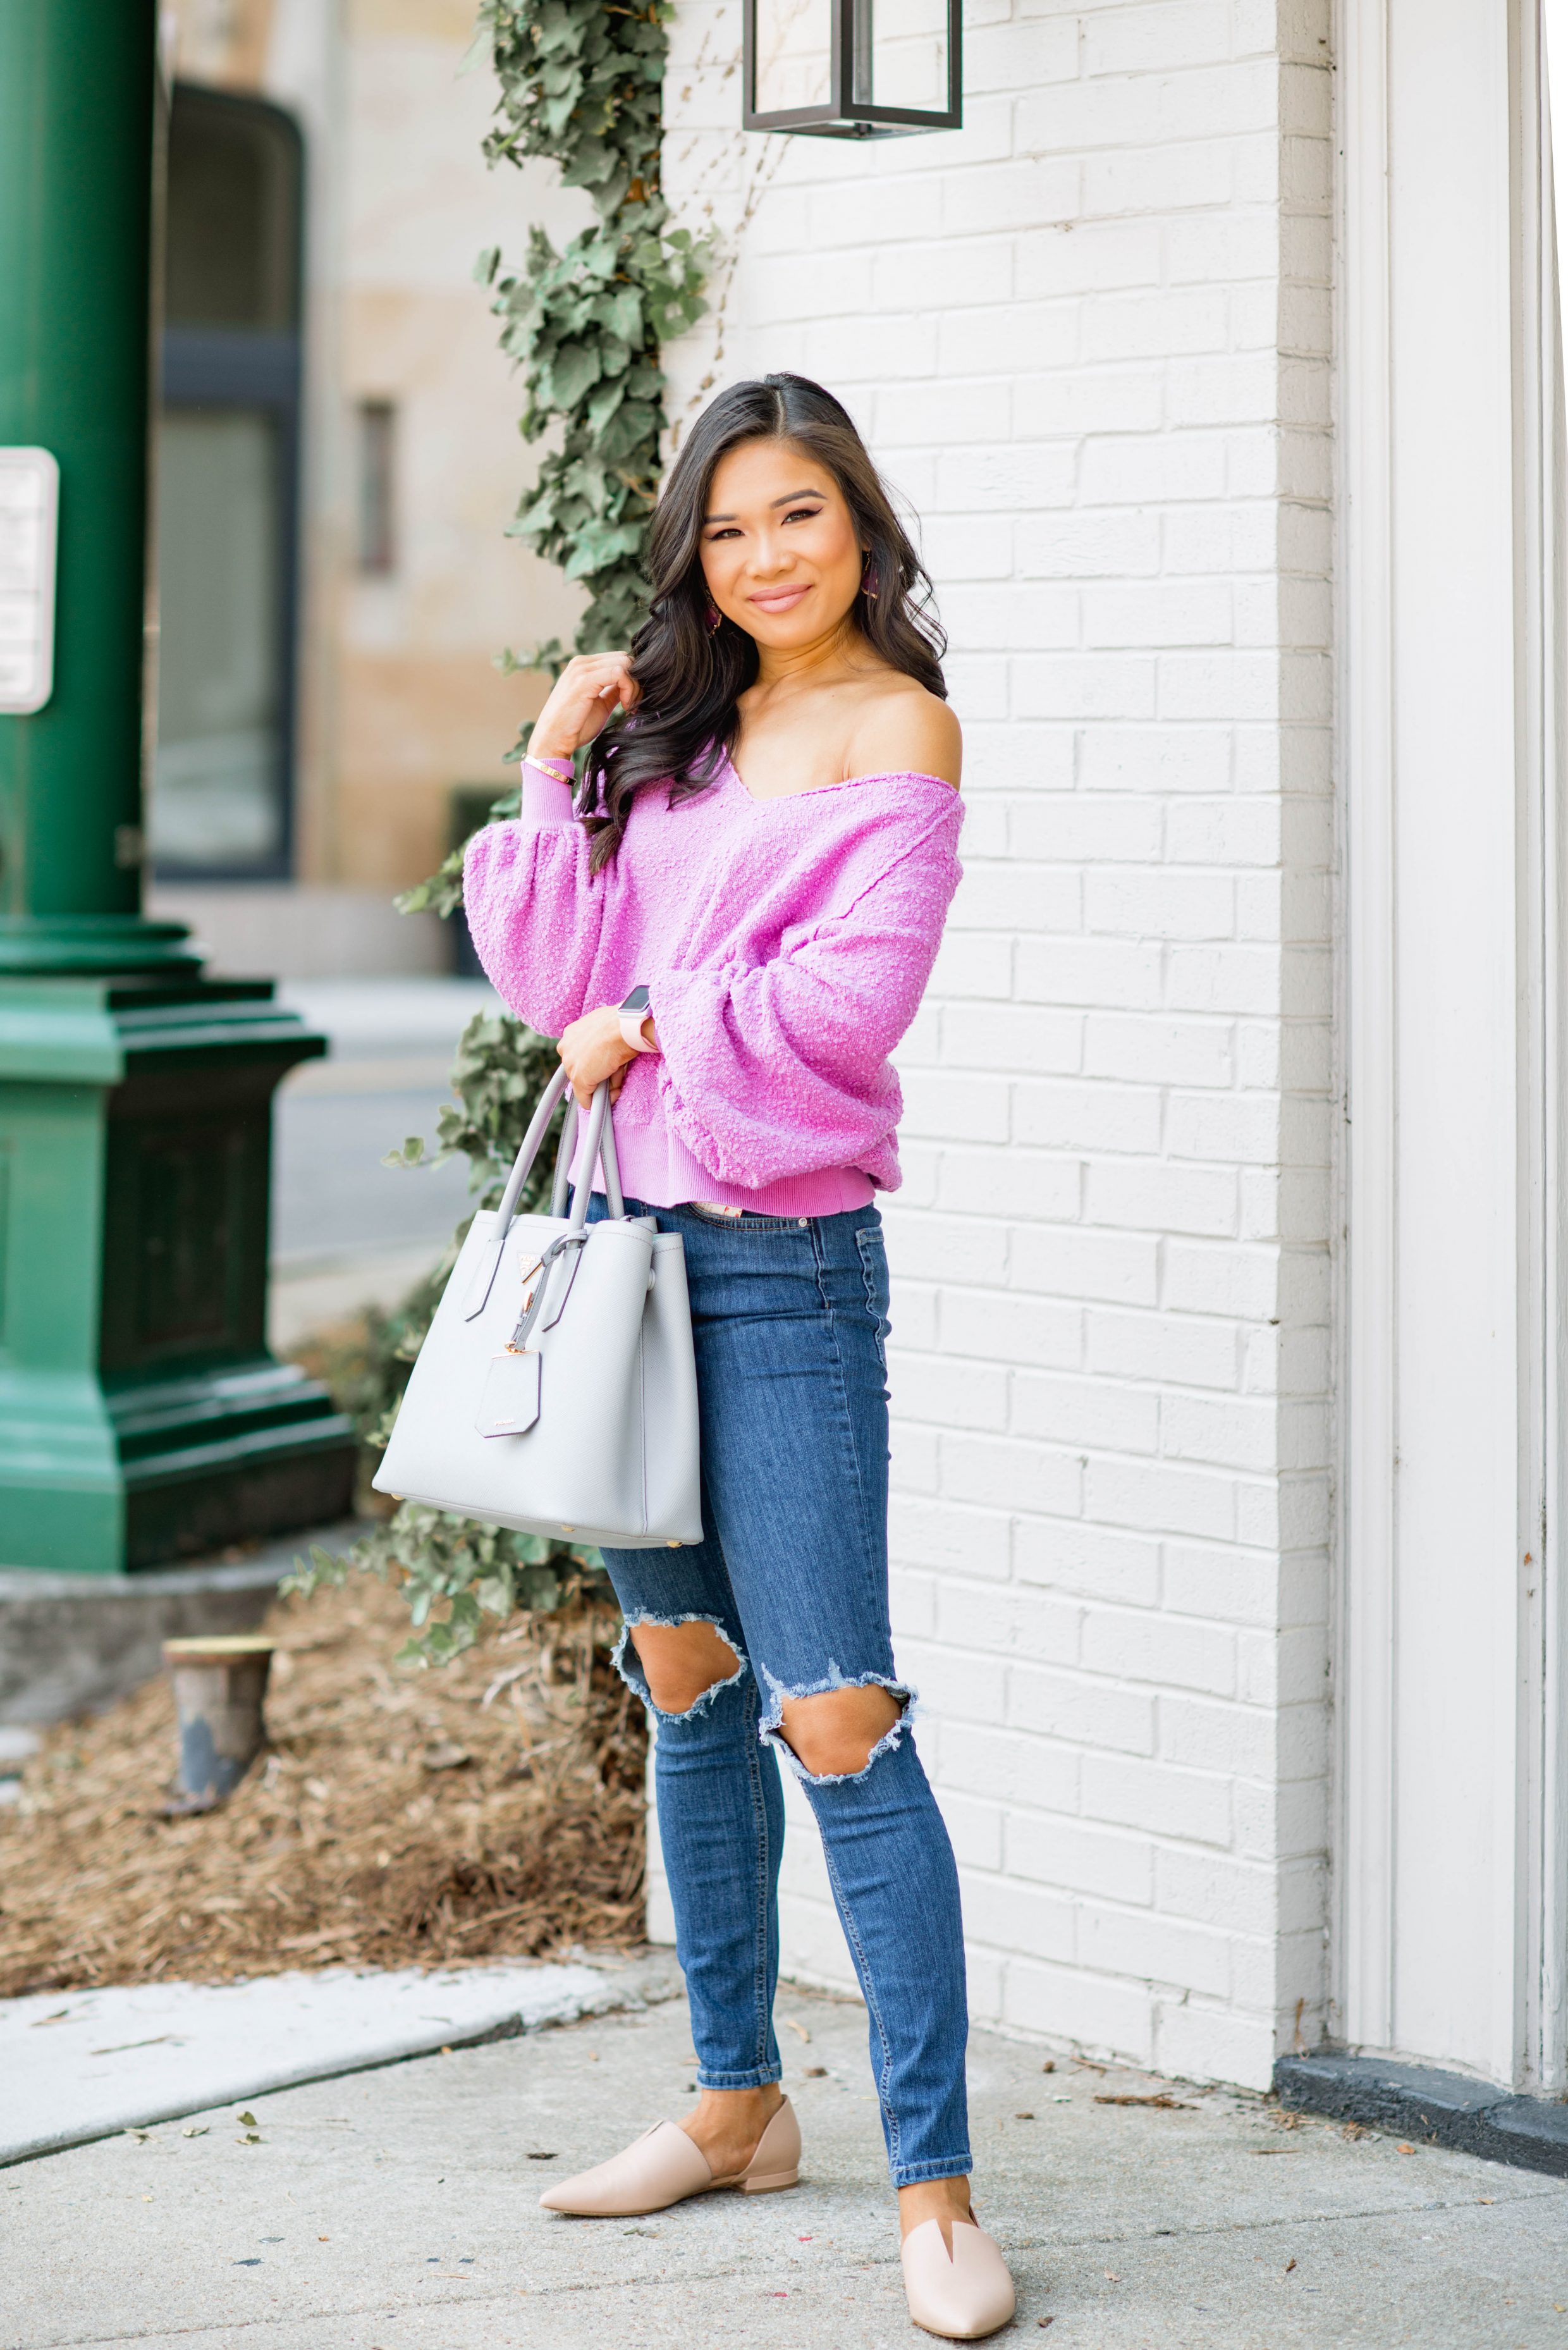 Hoang-Kim wears an easy fall outfit idea with slouchy free people balloon sleeve sweater, jeans and d'orsay nude flats